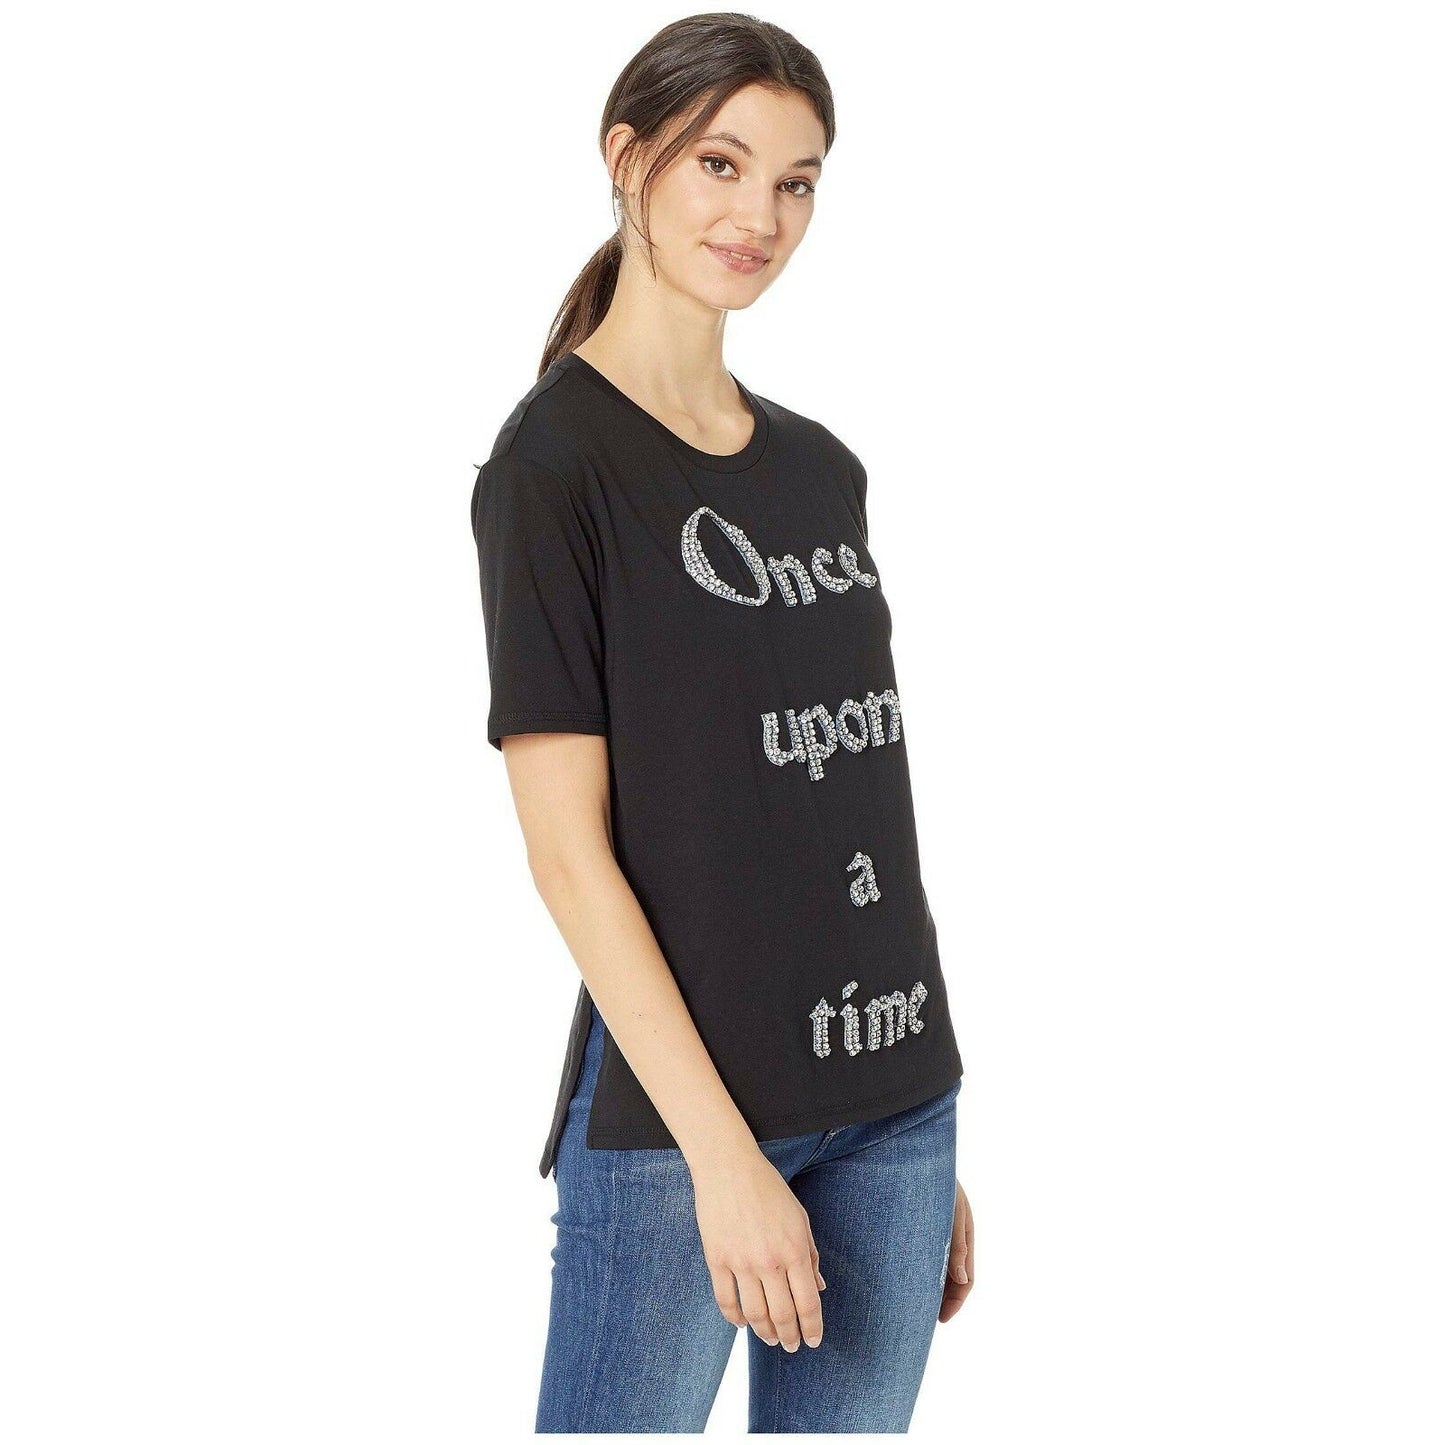 Juicy Couture Disney Crystal Once Upon A Time Beauty Beast Black T-Shirt M NWT